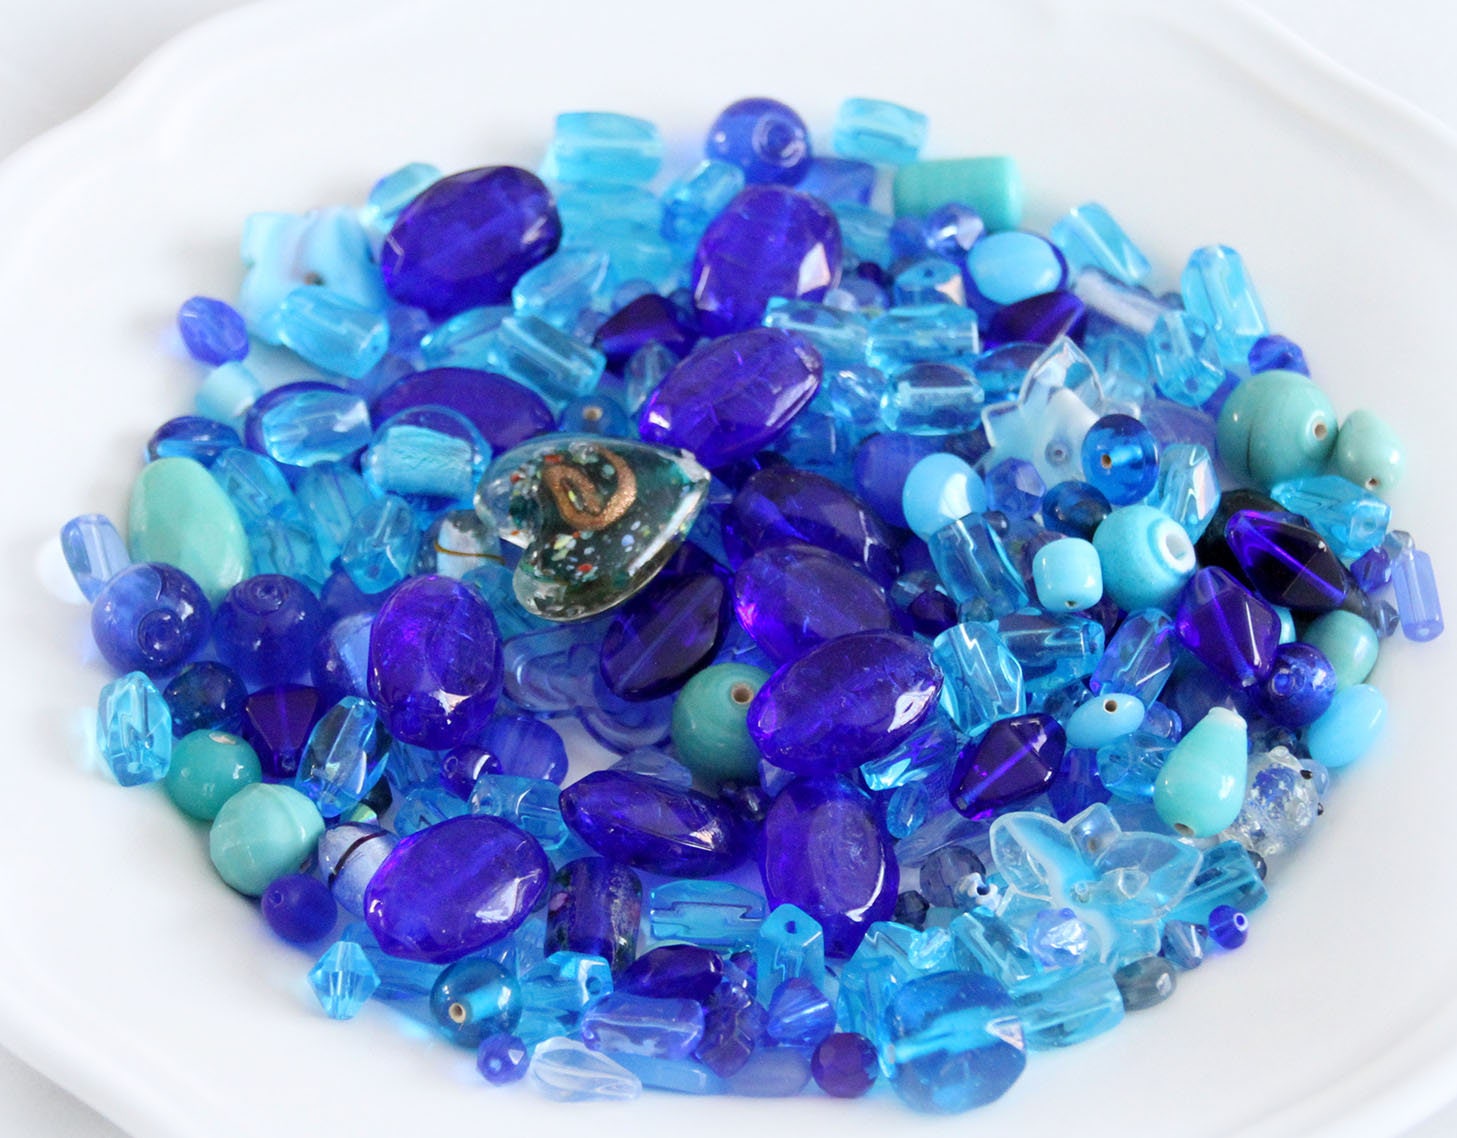 100 Blue Prince Pony Beads Mix 6mmx9mm Blue, White, Glitter Pearl Hair  Dummy Clip Jewellery Loom Bands Crafts 